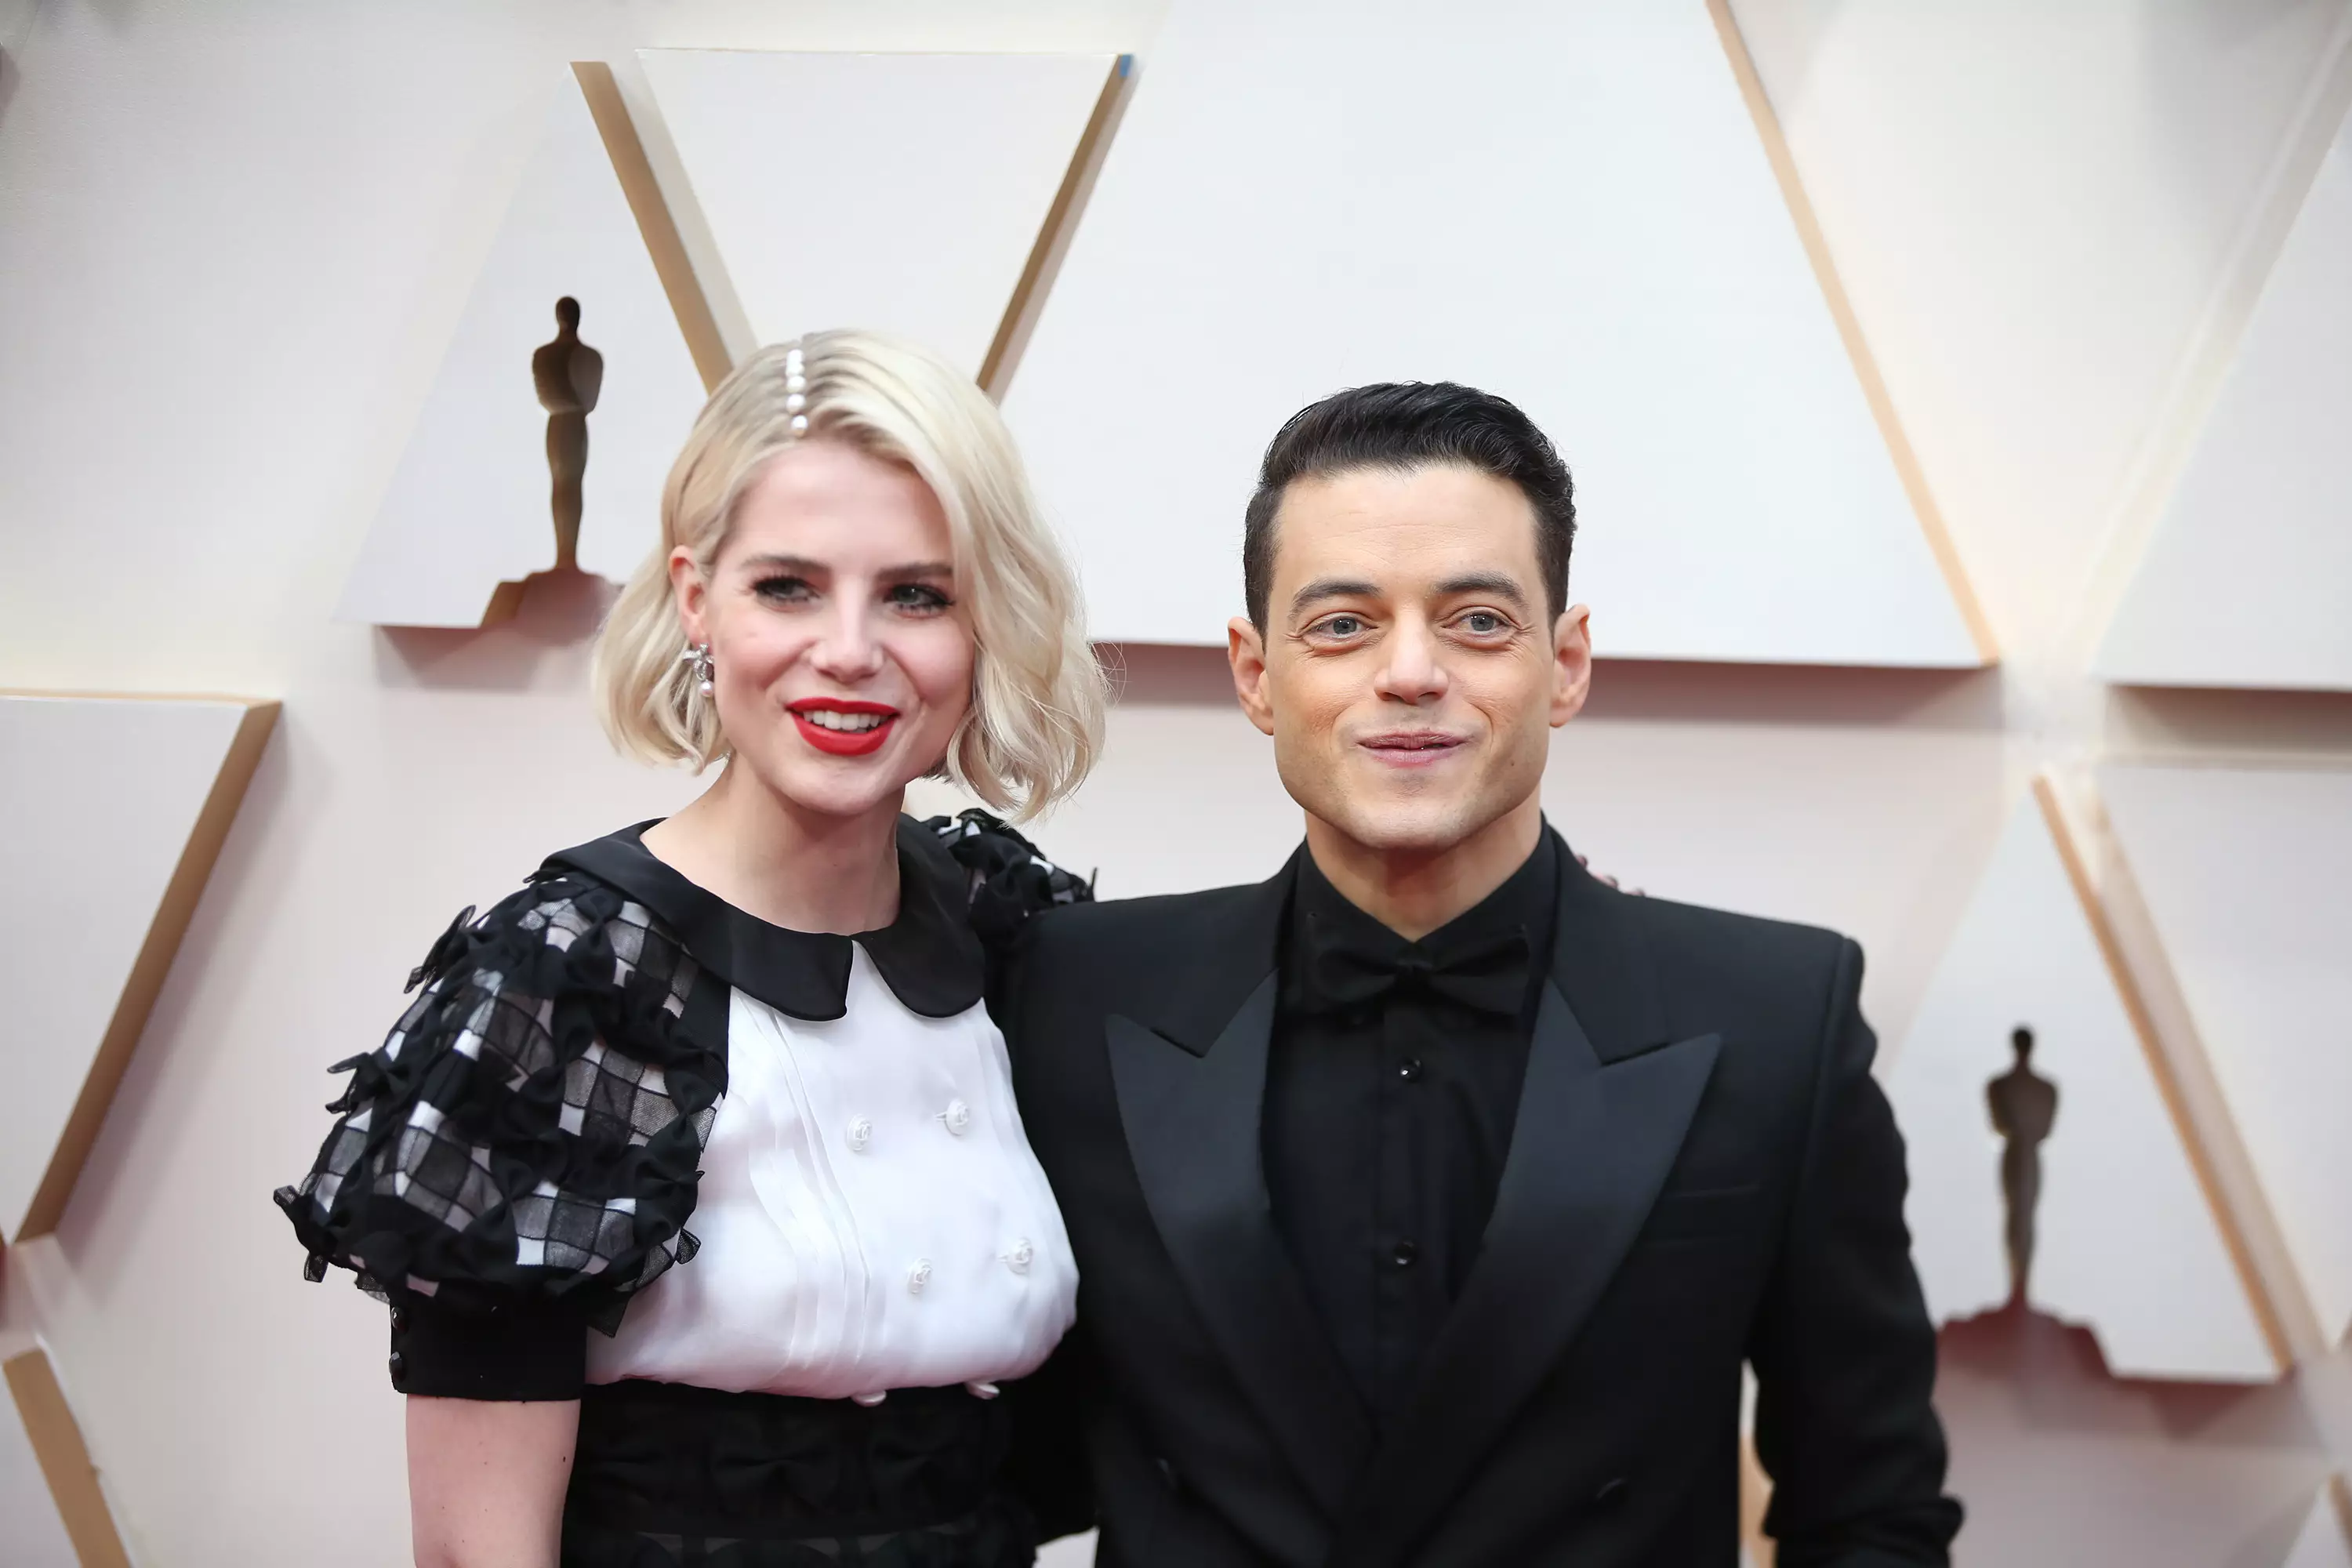 Rami Malek and Lucy Boynton arrive for the red carpet of the 92nd Academy Awards in 2020. (